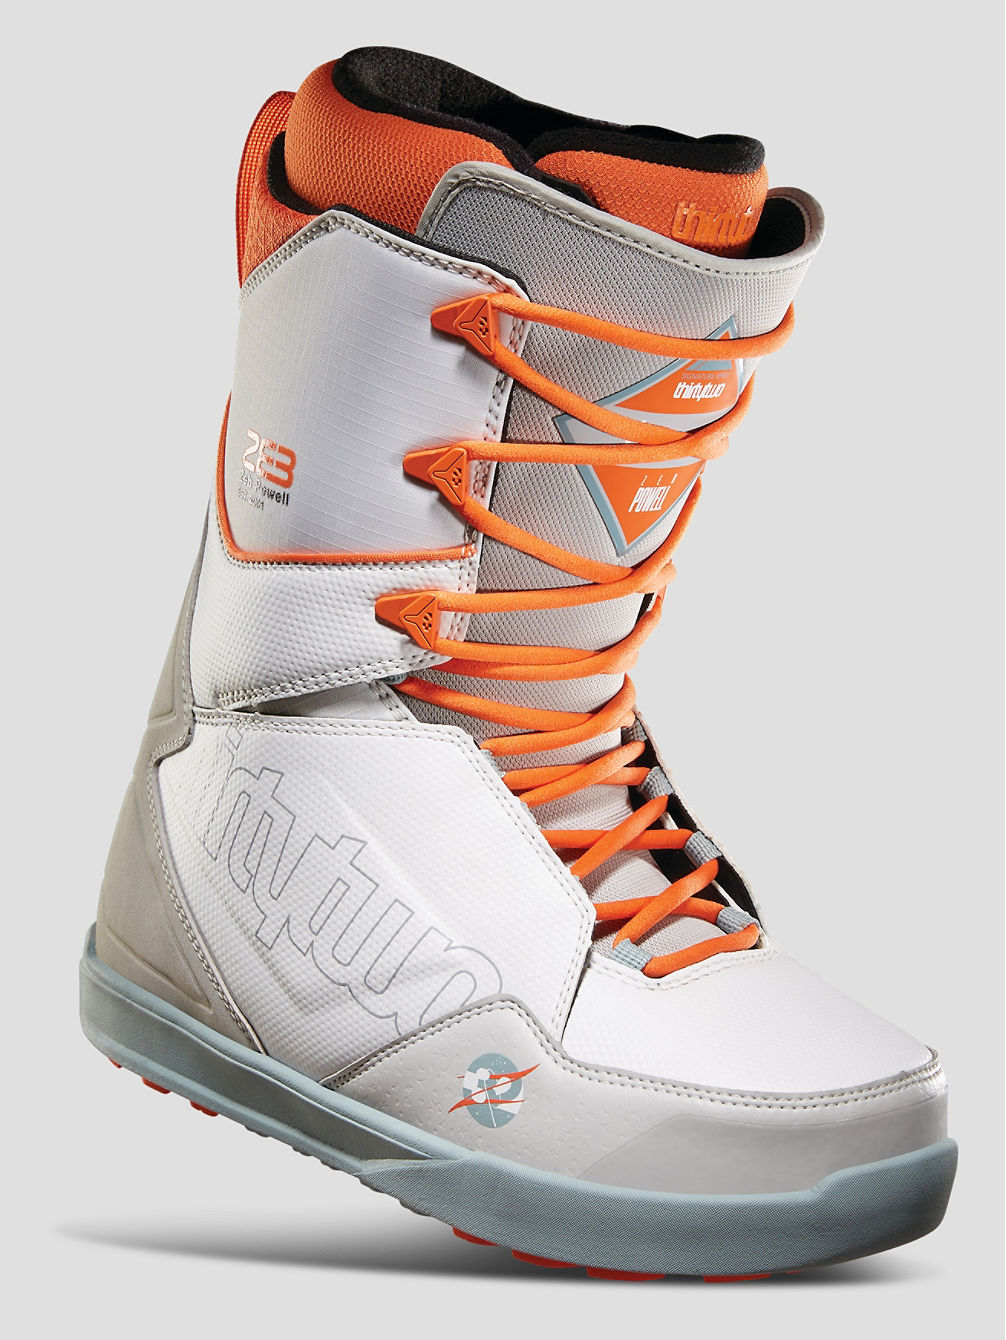 Lashed Powell Snowboard Boots